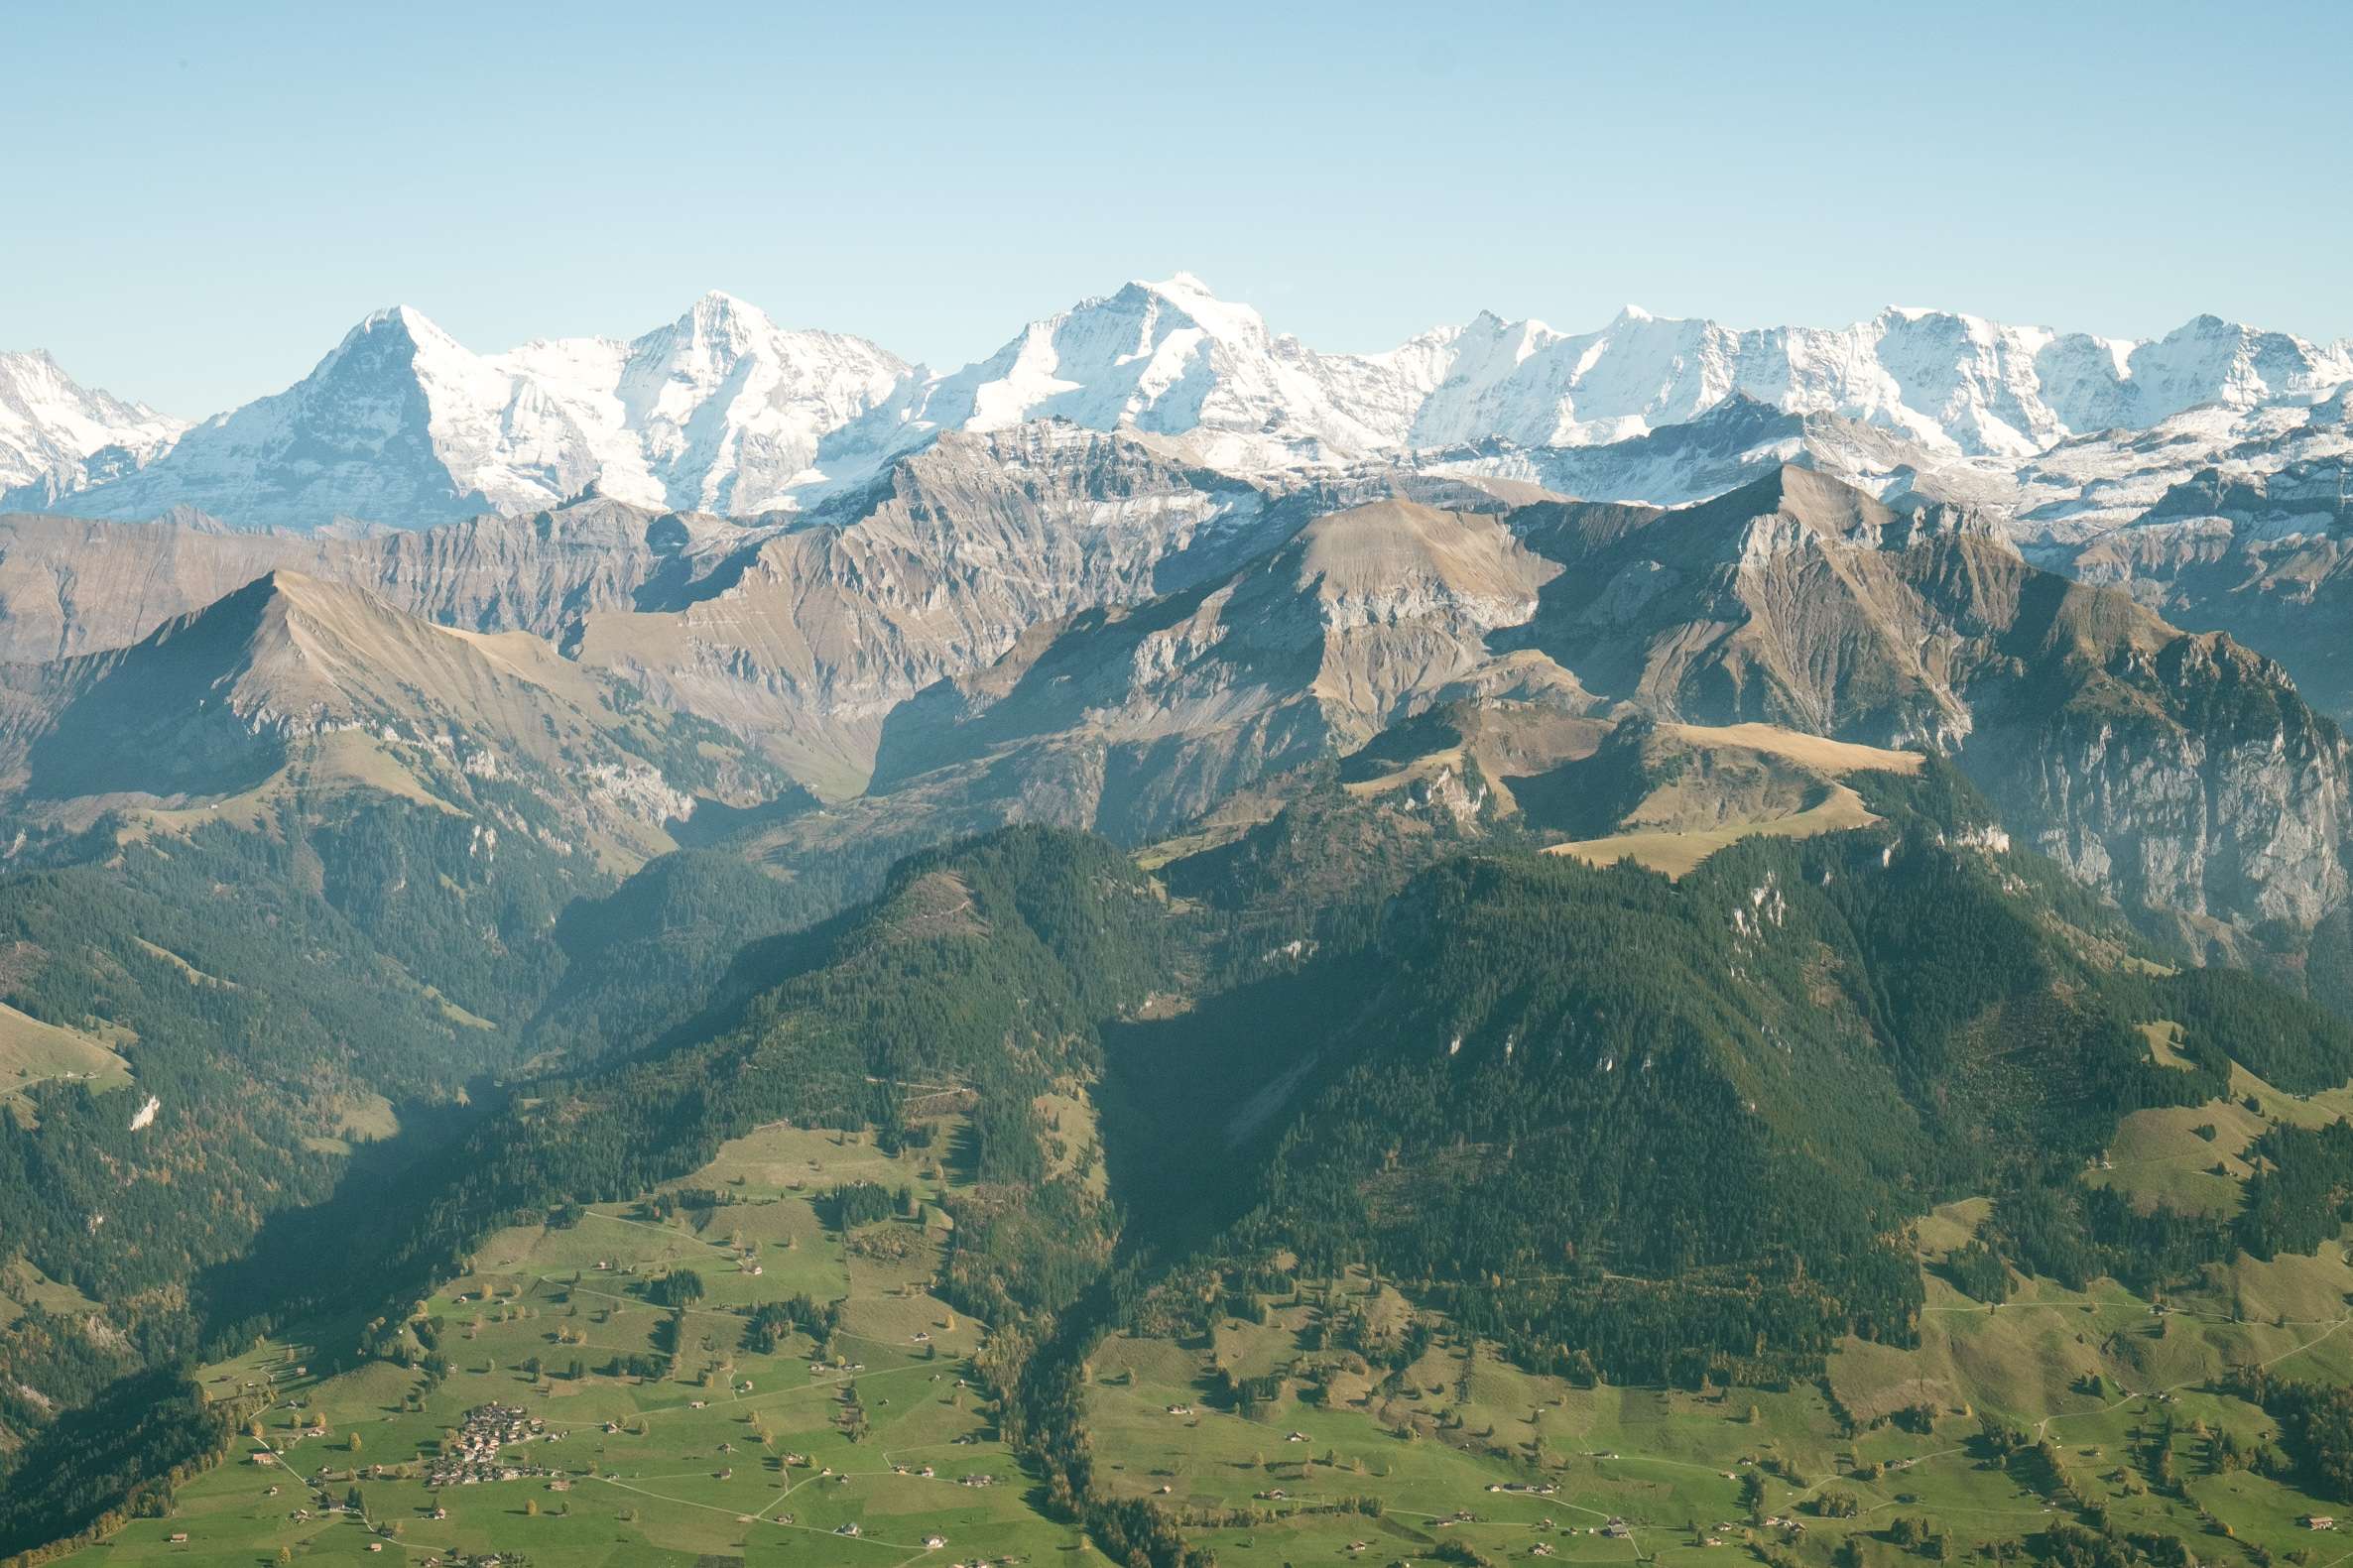 The view of the snow capped Jungfrau peaks from Niesen